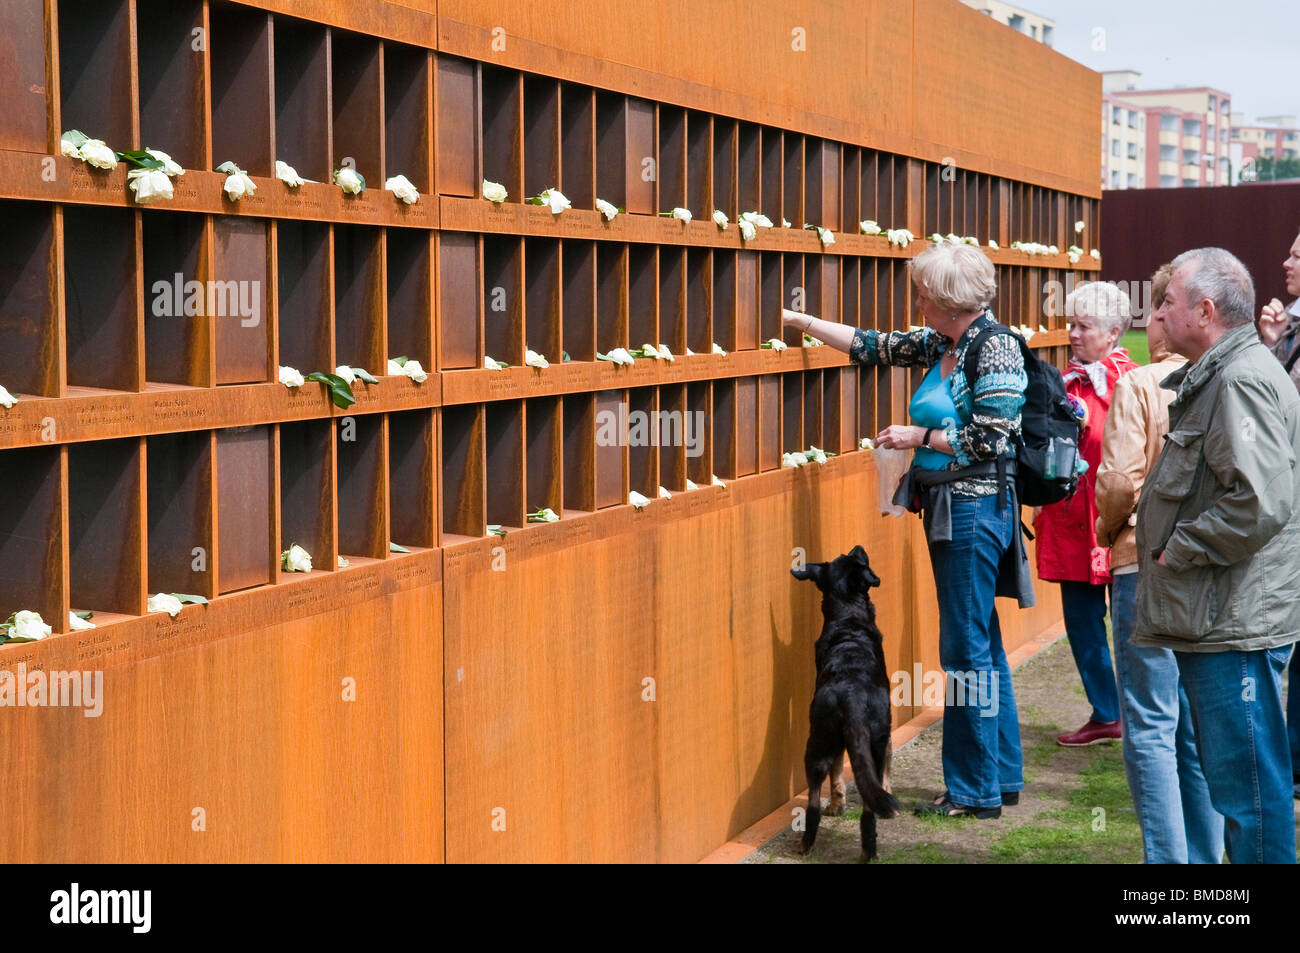 Wall with photos of victims at the Berlin Wall Memorial in the Bernauer Strasse, Berlin, Germany Stock Photo